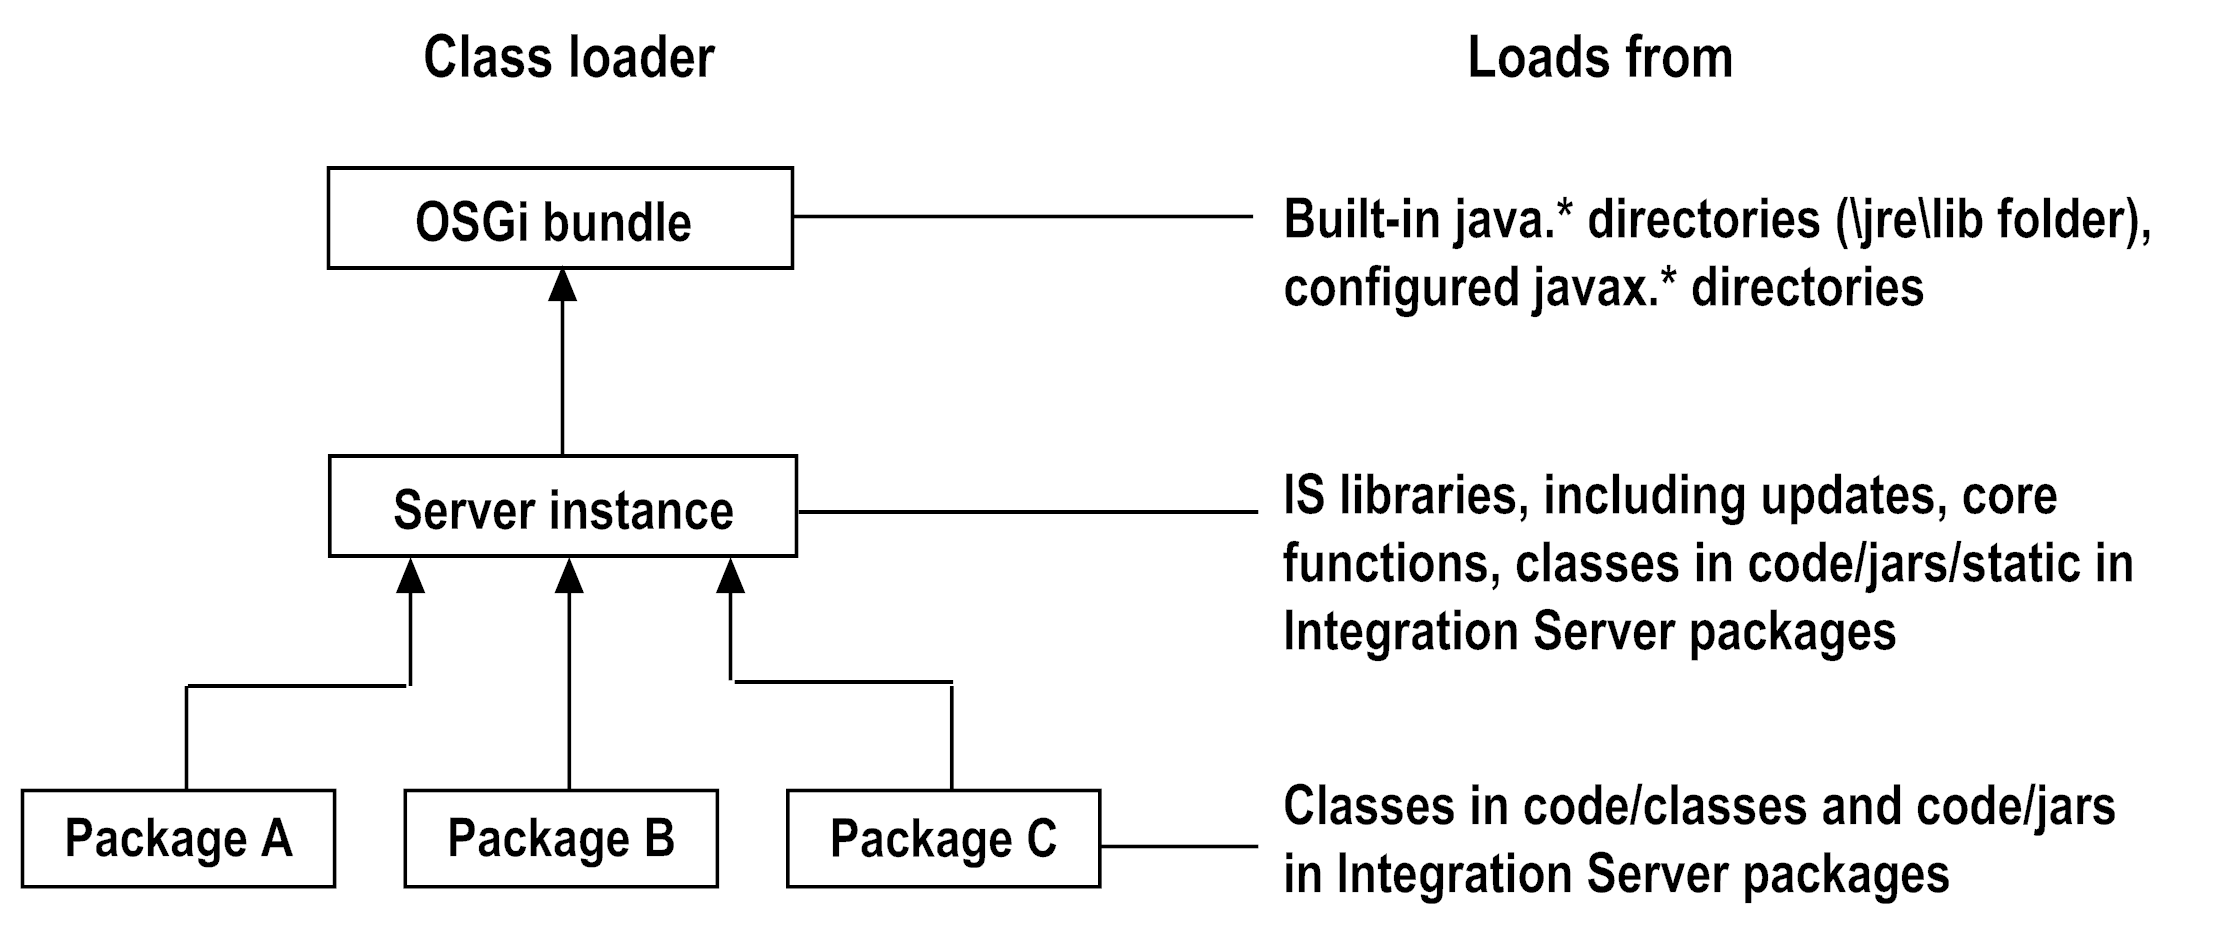 Class loader chain in Integration Server